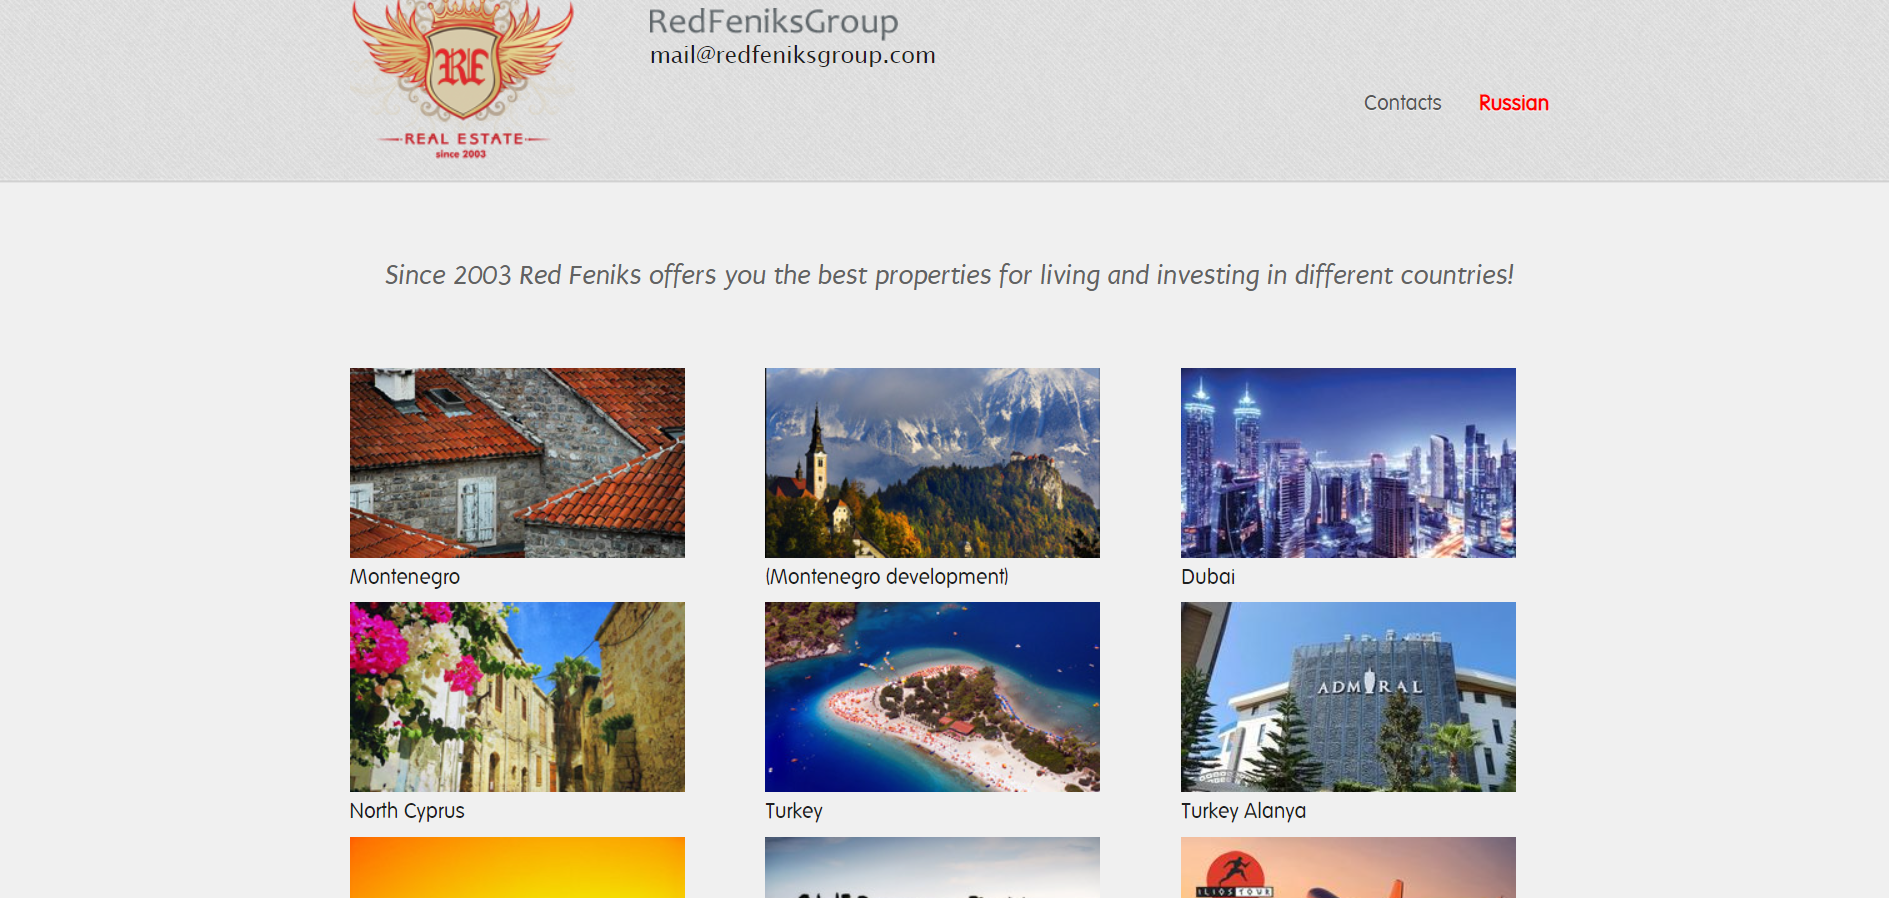 Real Estate Agency Red Feniks: Our Experience and Warnings